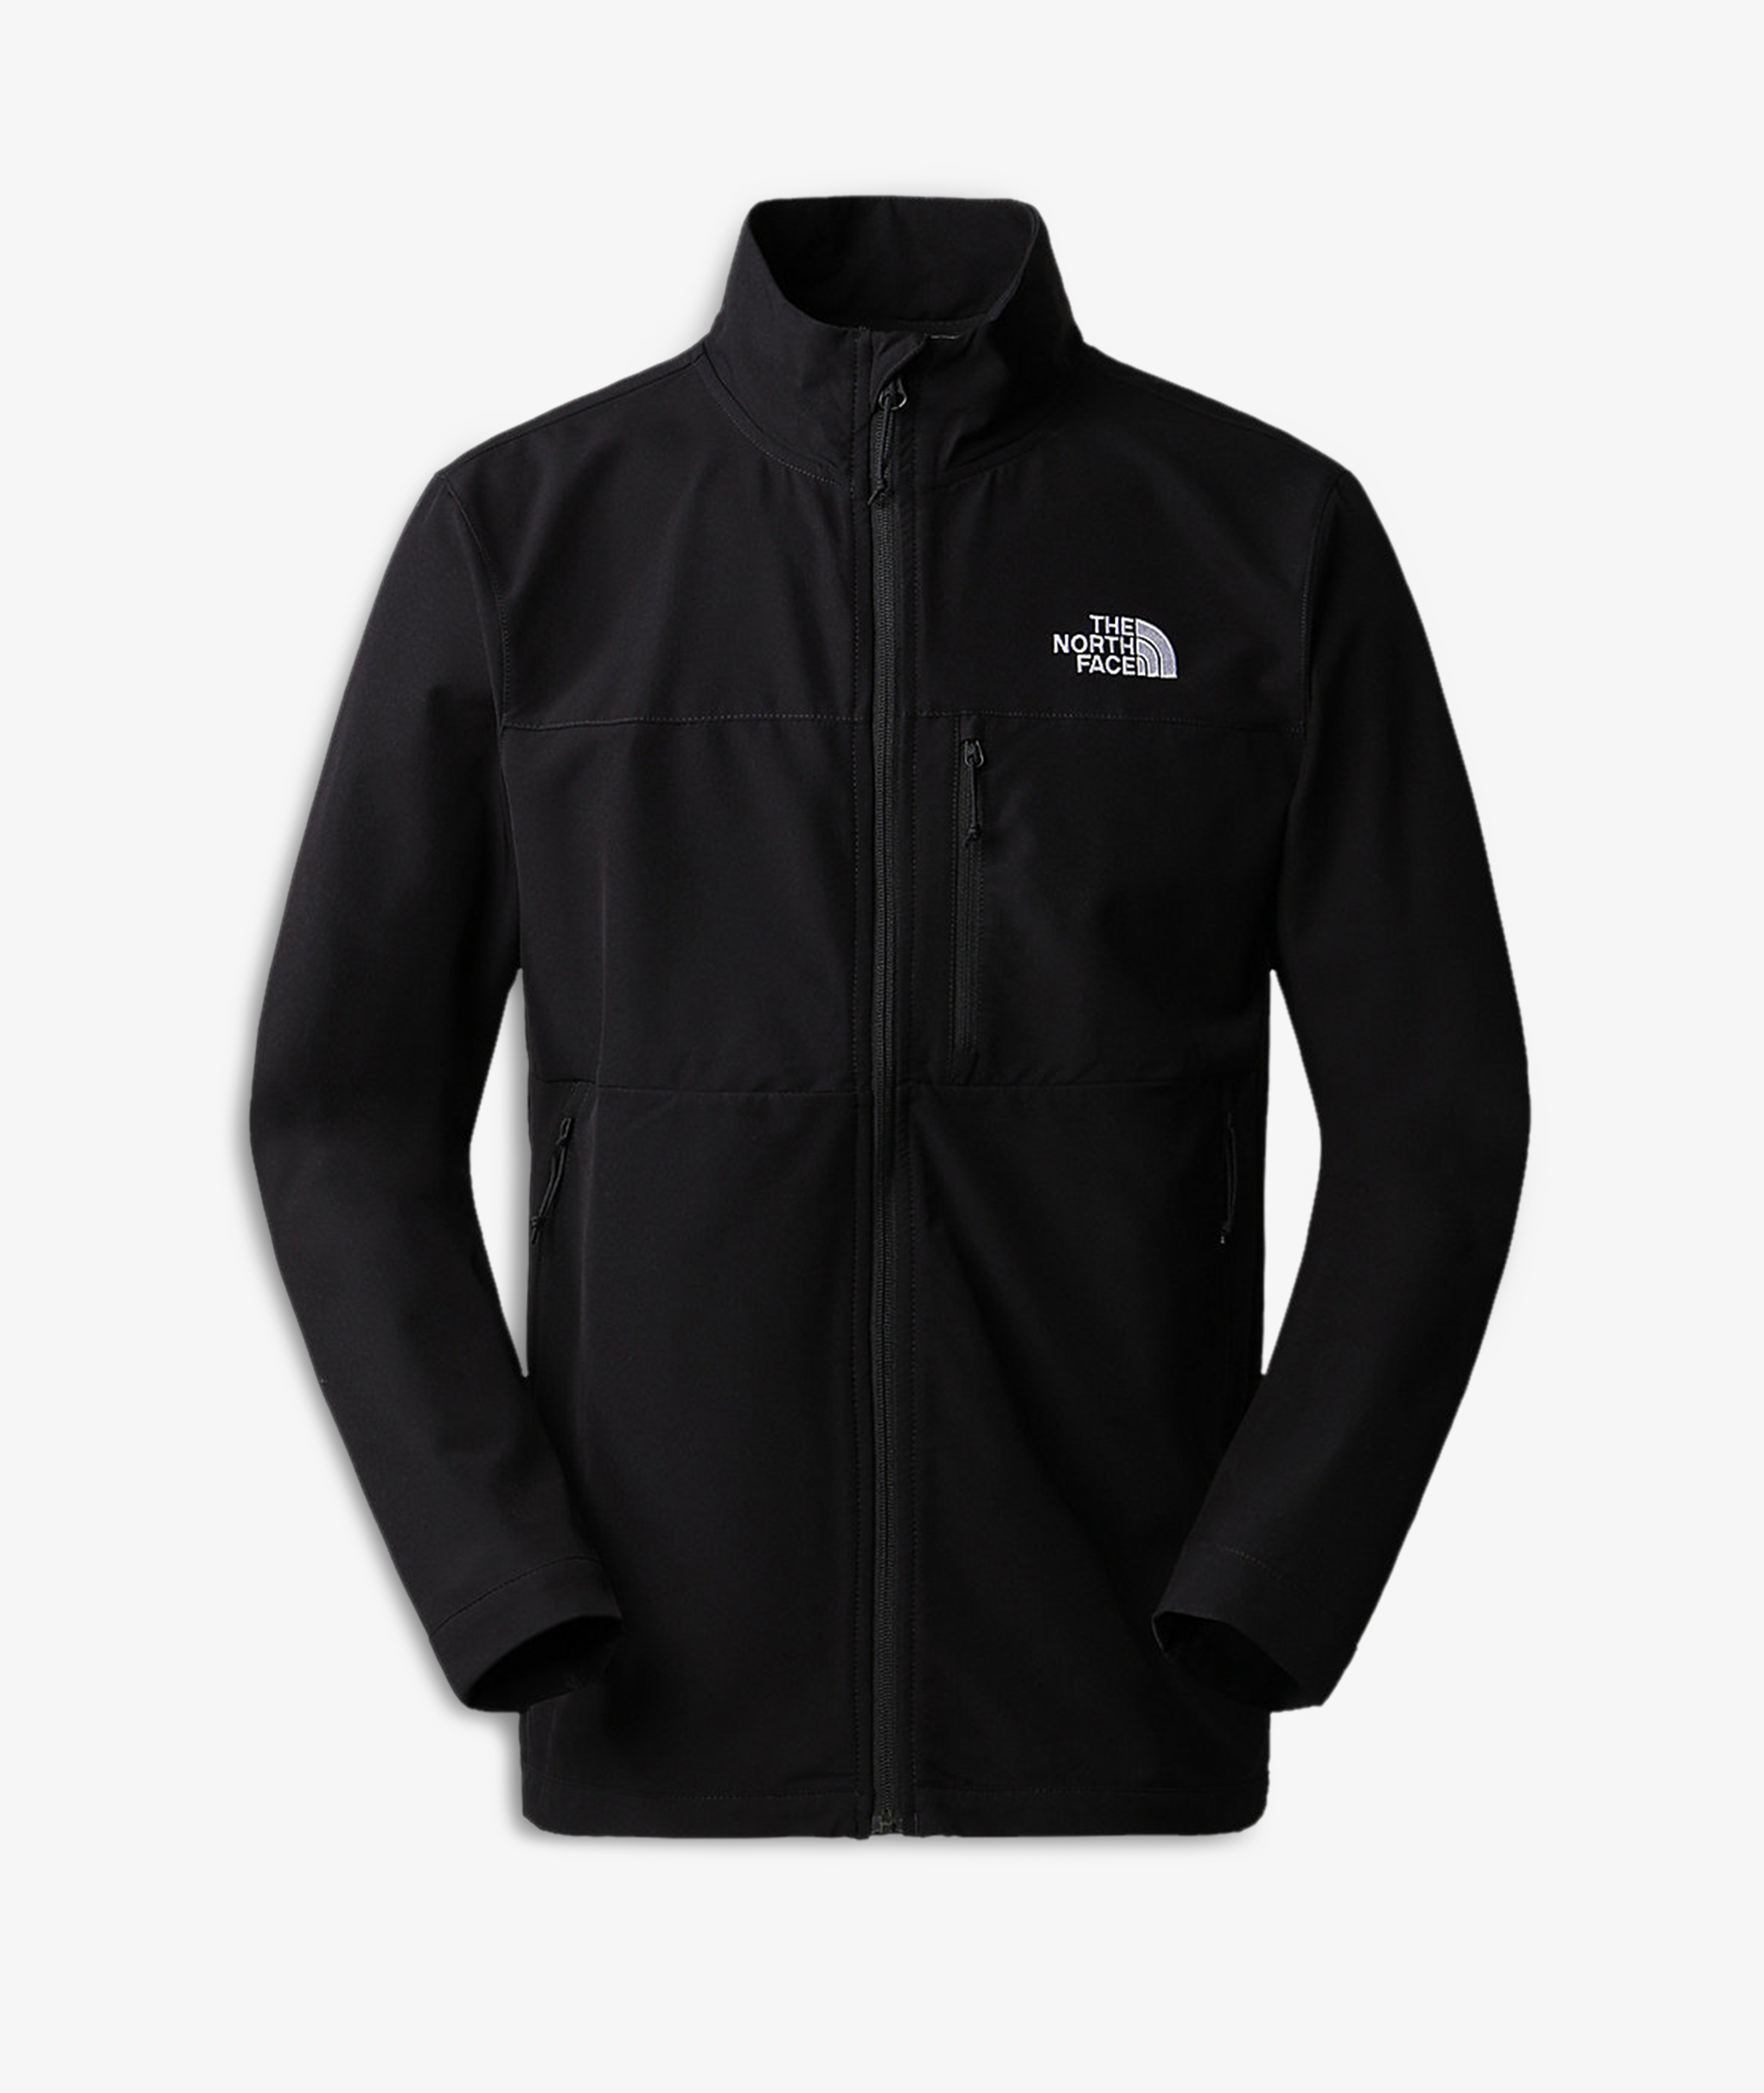 Norse Store | Shipping Worldwide - The North Face M TRAVEL JACKET 